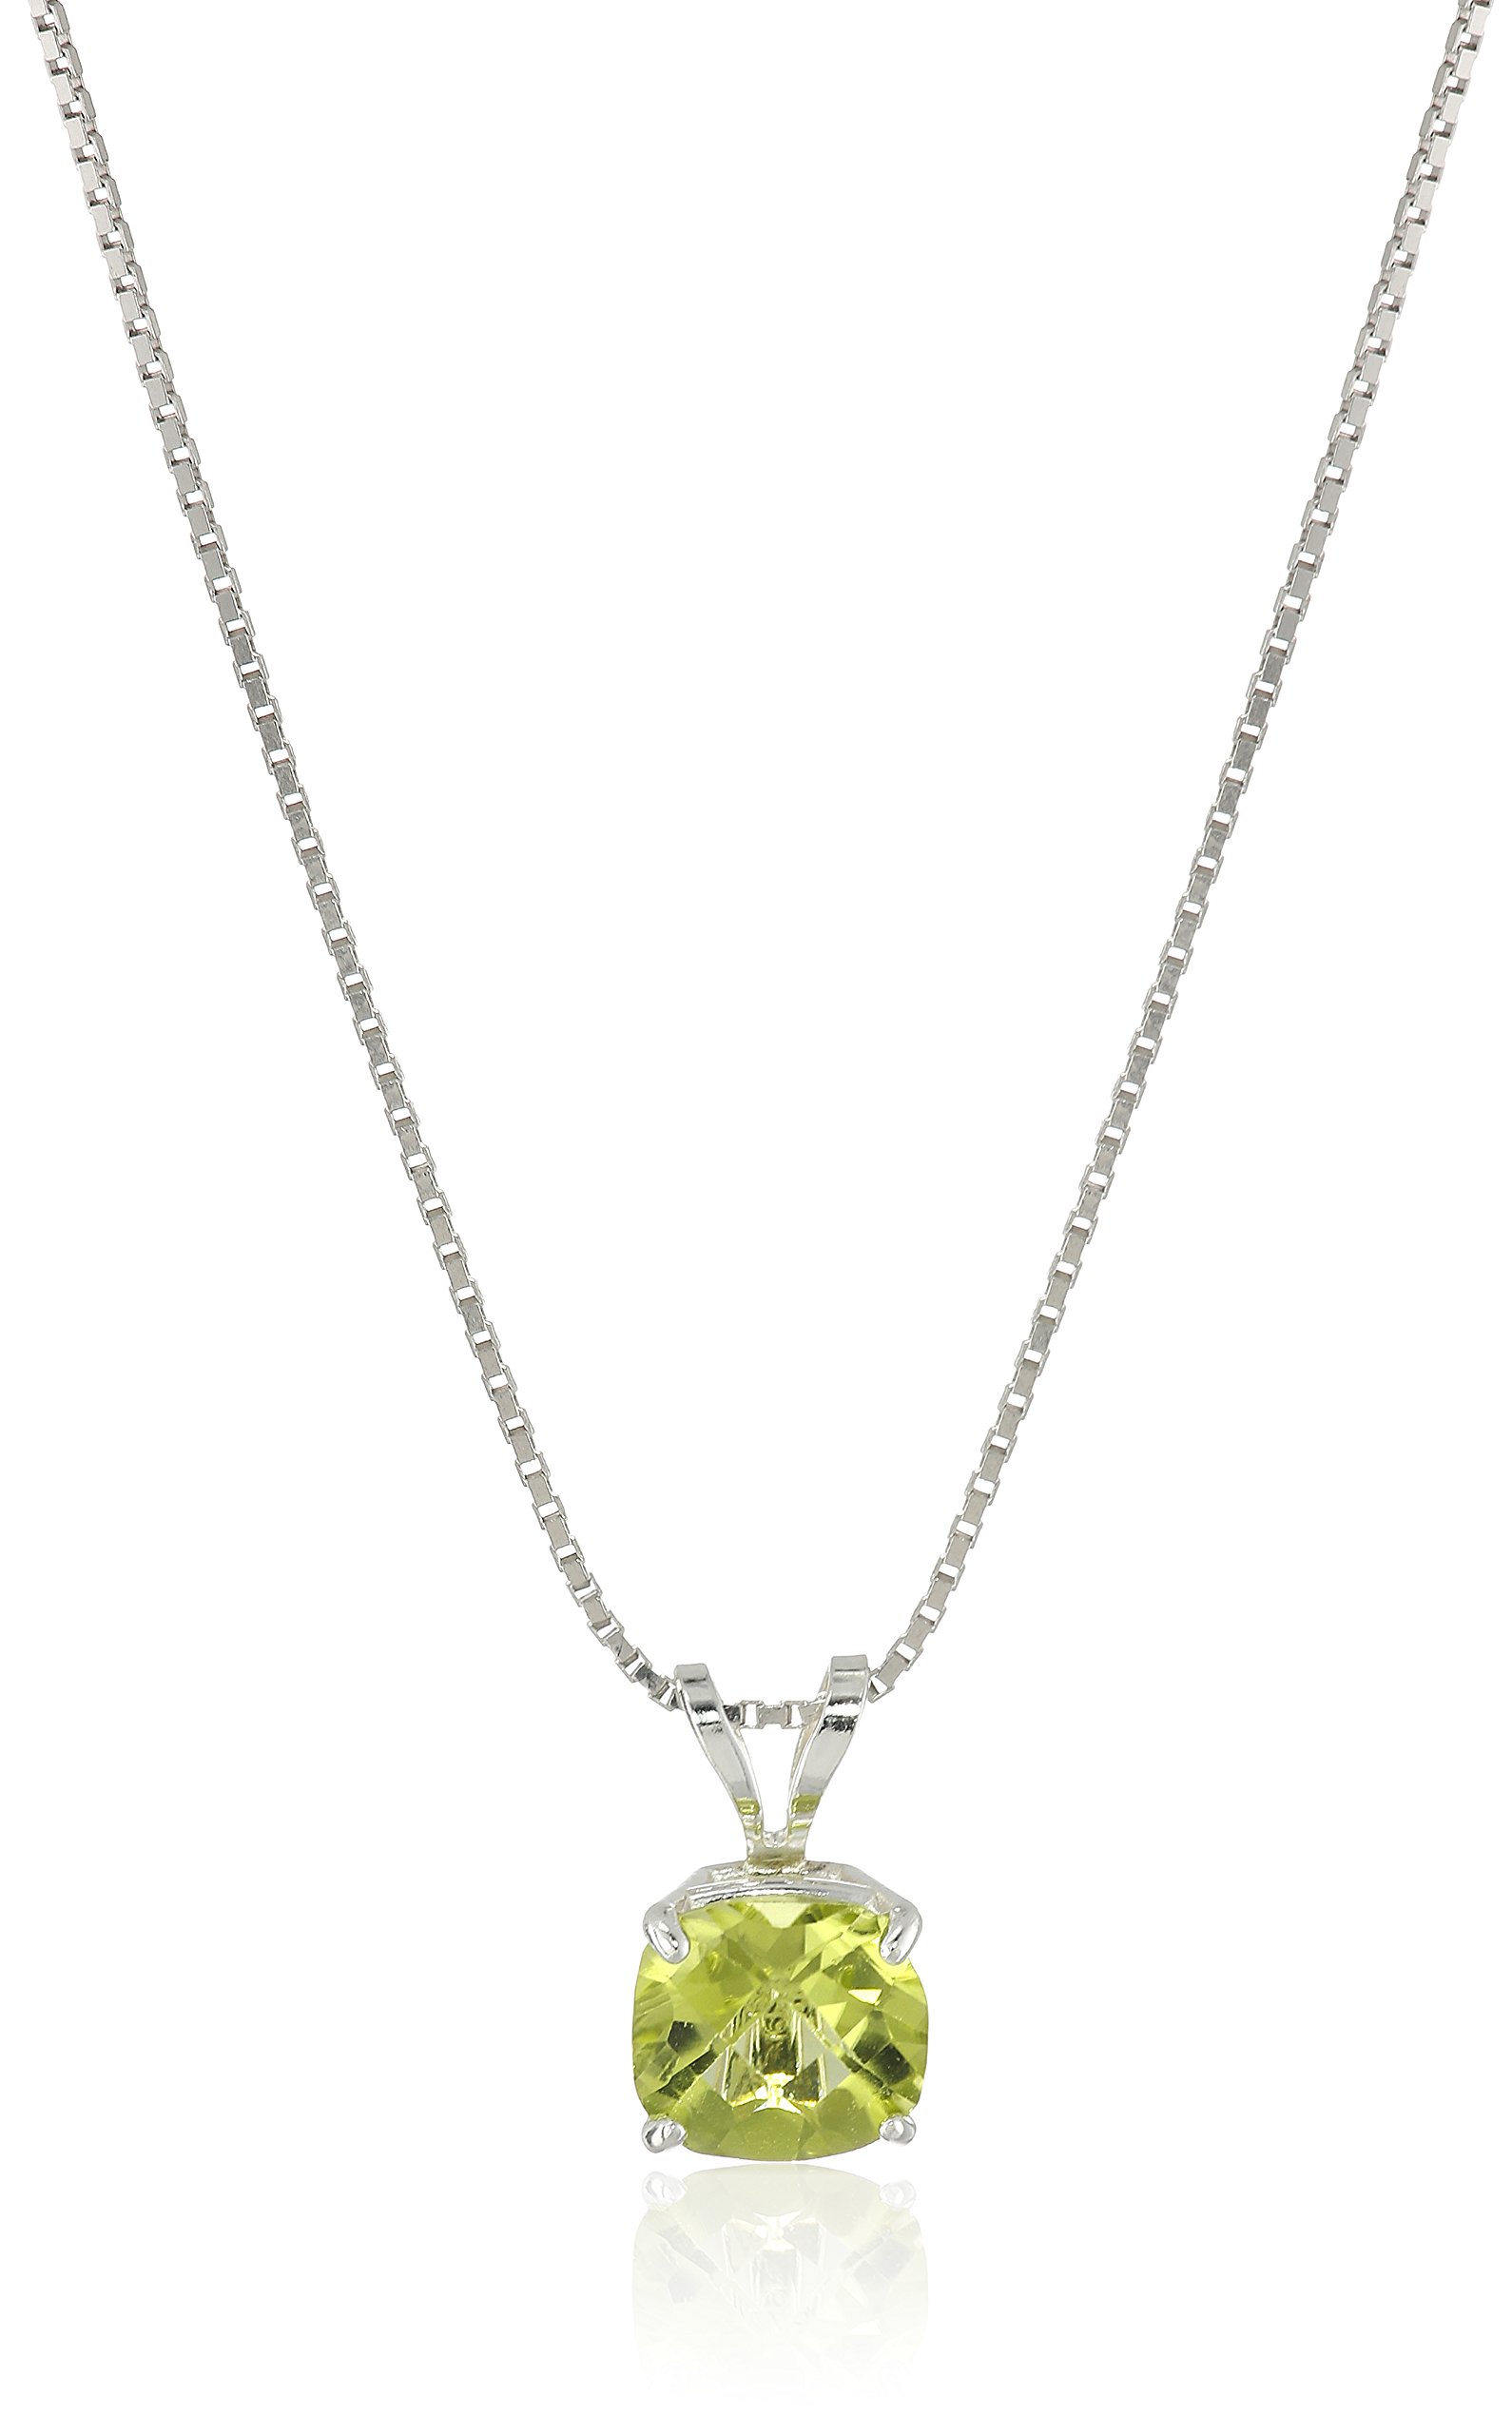 Amazon Collection 925 Sterling Silver 6mm Cushion Cut Gemstone Pendant Necklace for Women with 18 Inch Box Chain